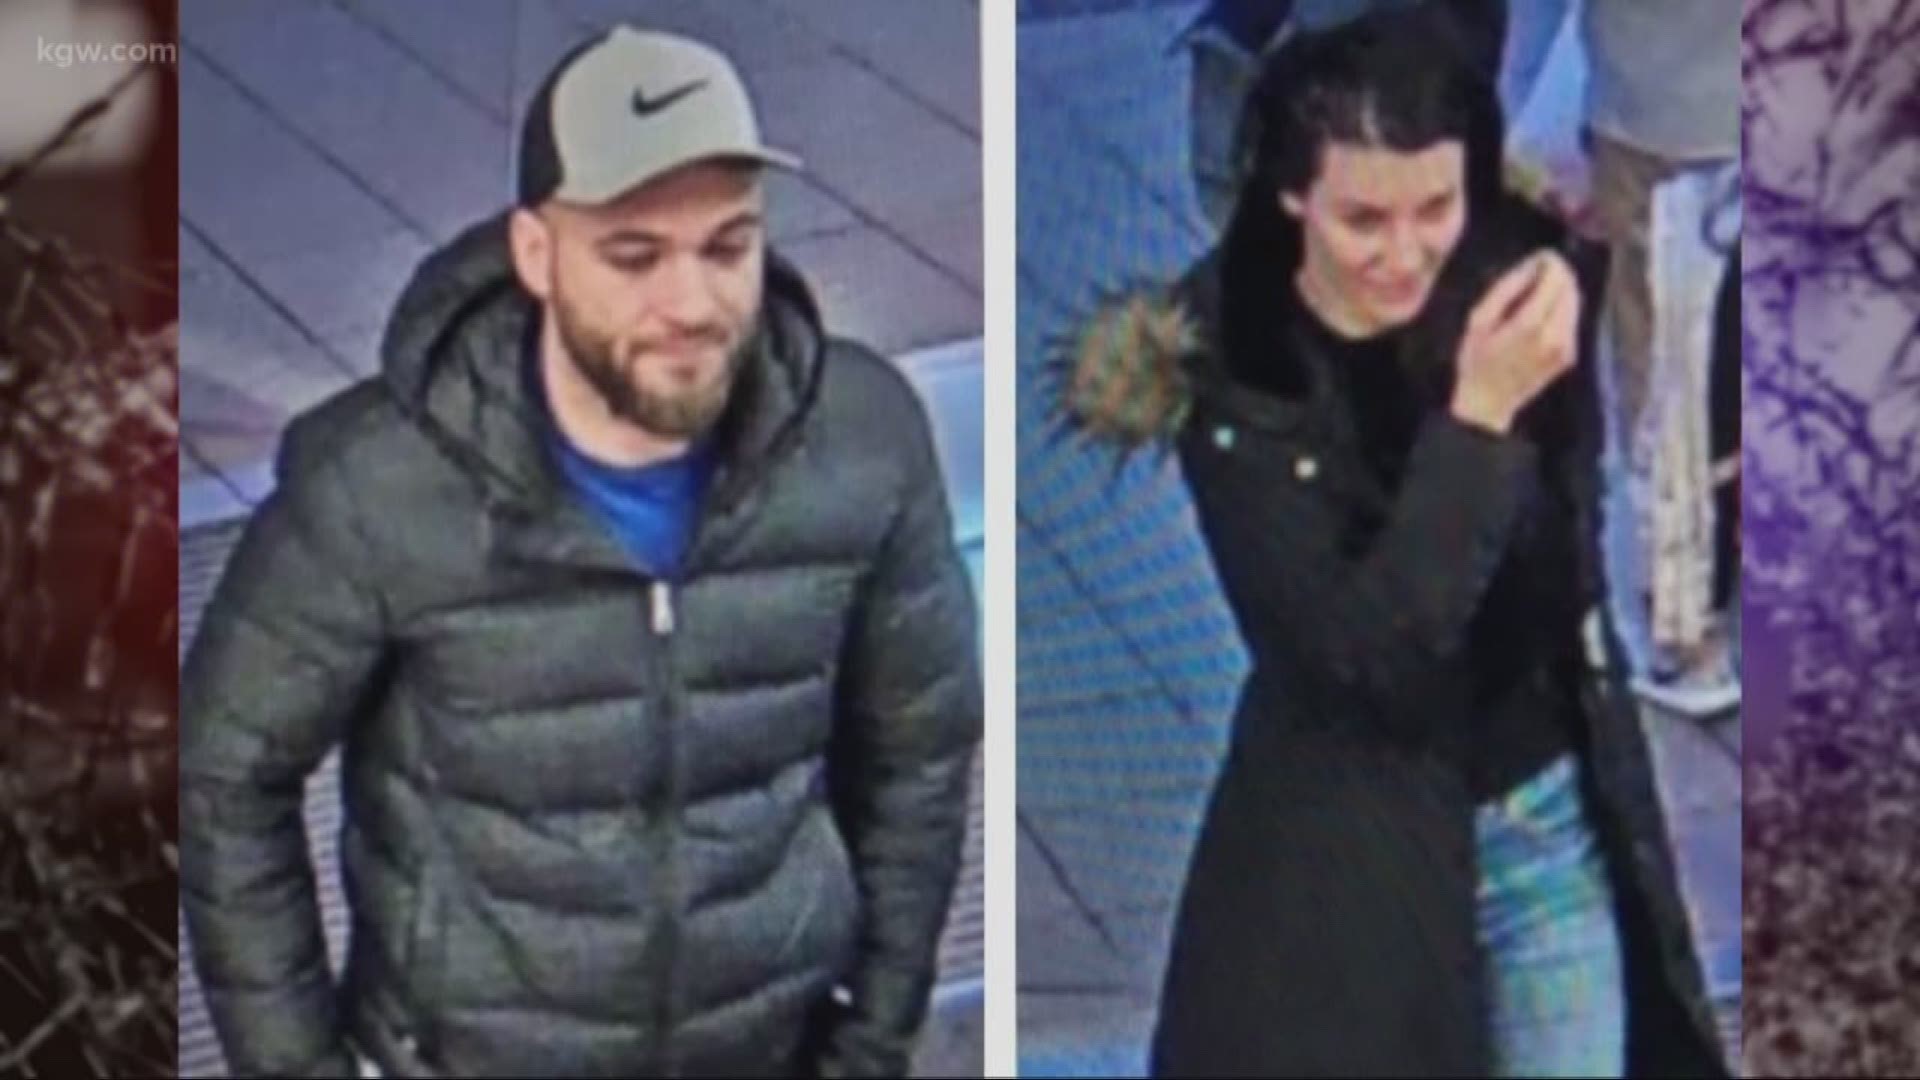 Police are asking for the public’s help with identifying two suspects who they say stole $115,000 worth of electronics from a woman’s car at Bridgeport Village.